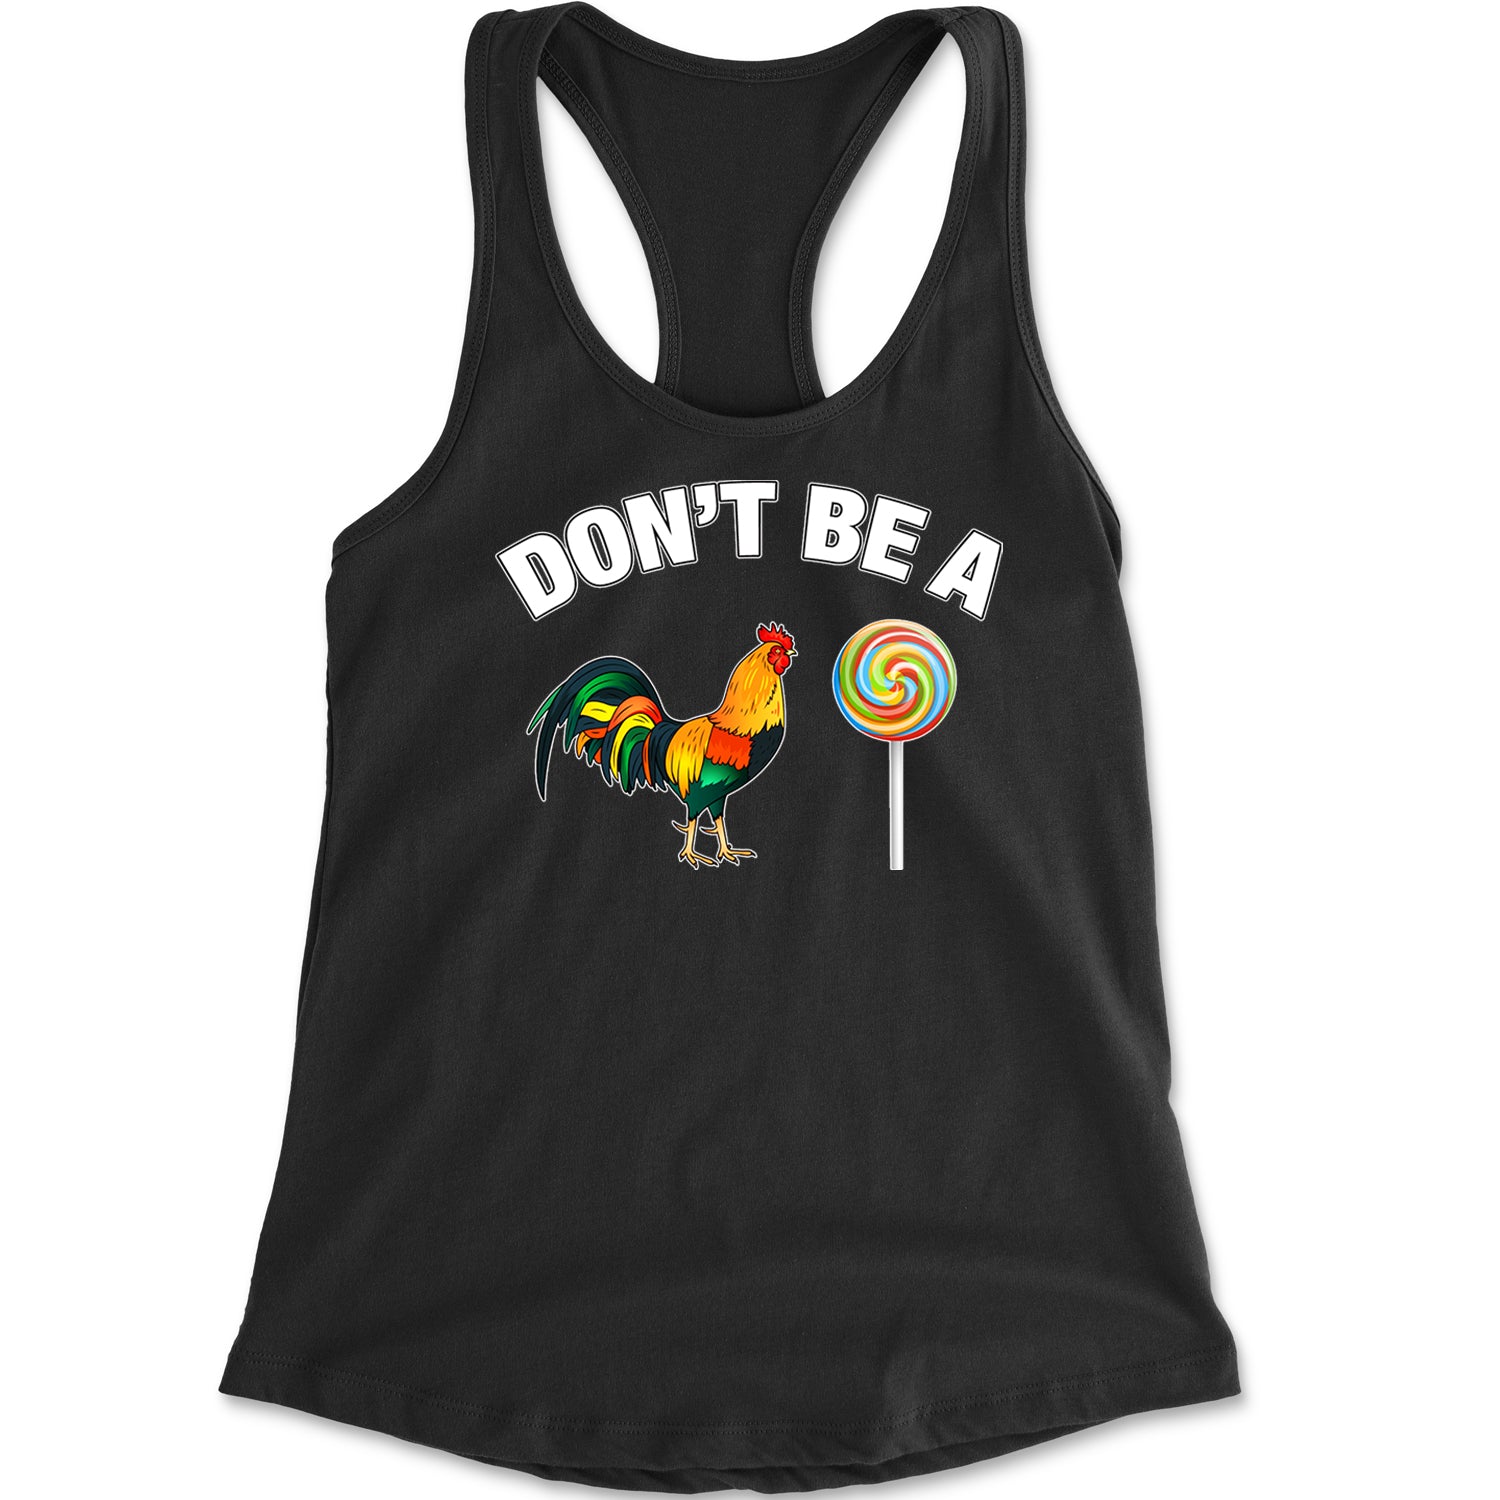 Don't Be A C-ck Sucker Funny Sarcastic Racerback Tank Top for Women